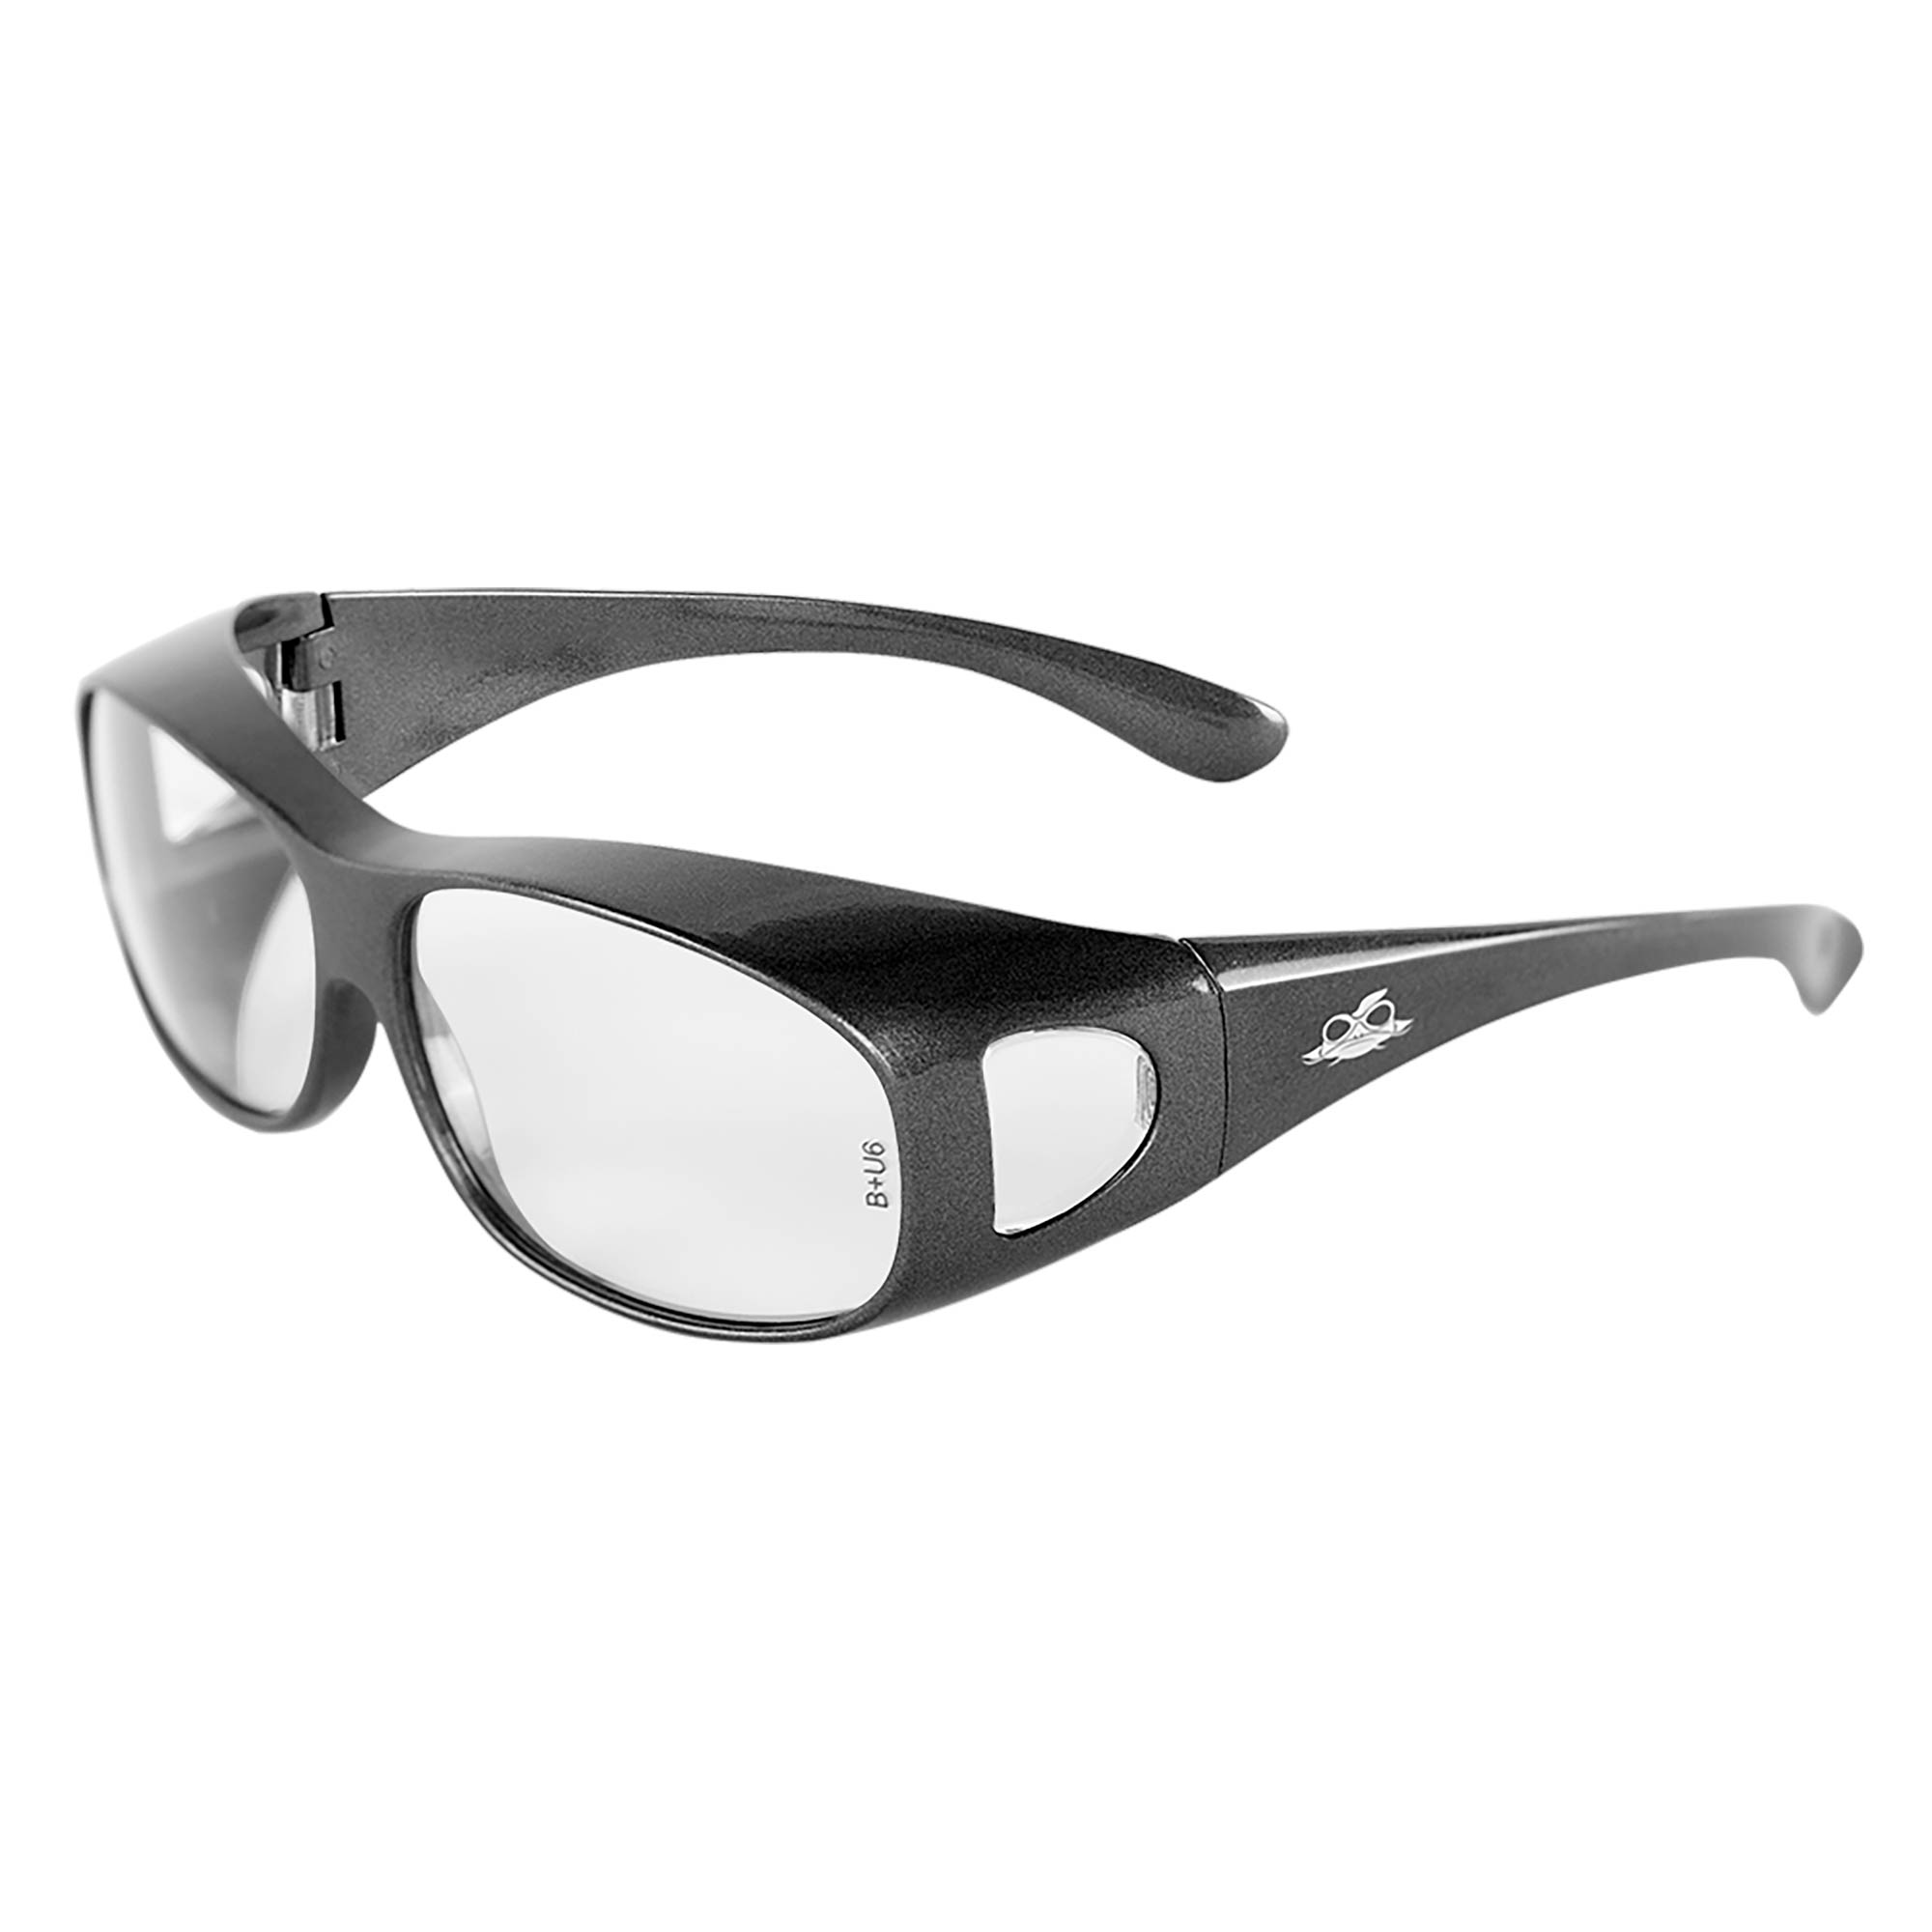 Bullhead Safety Eyewear BH691 Stinger One Size Fits All Shiny Pearl Gray for sale online 